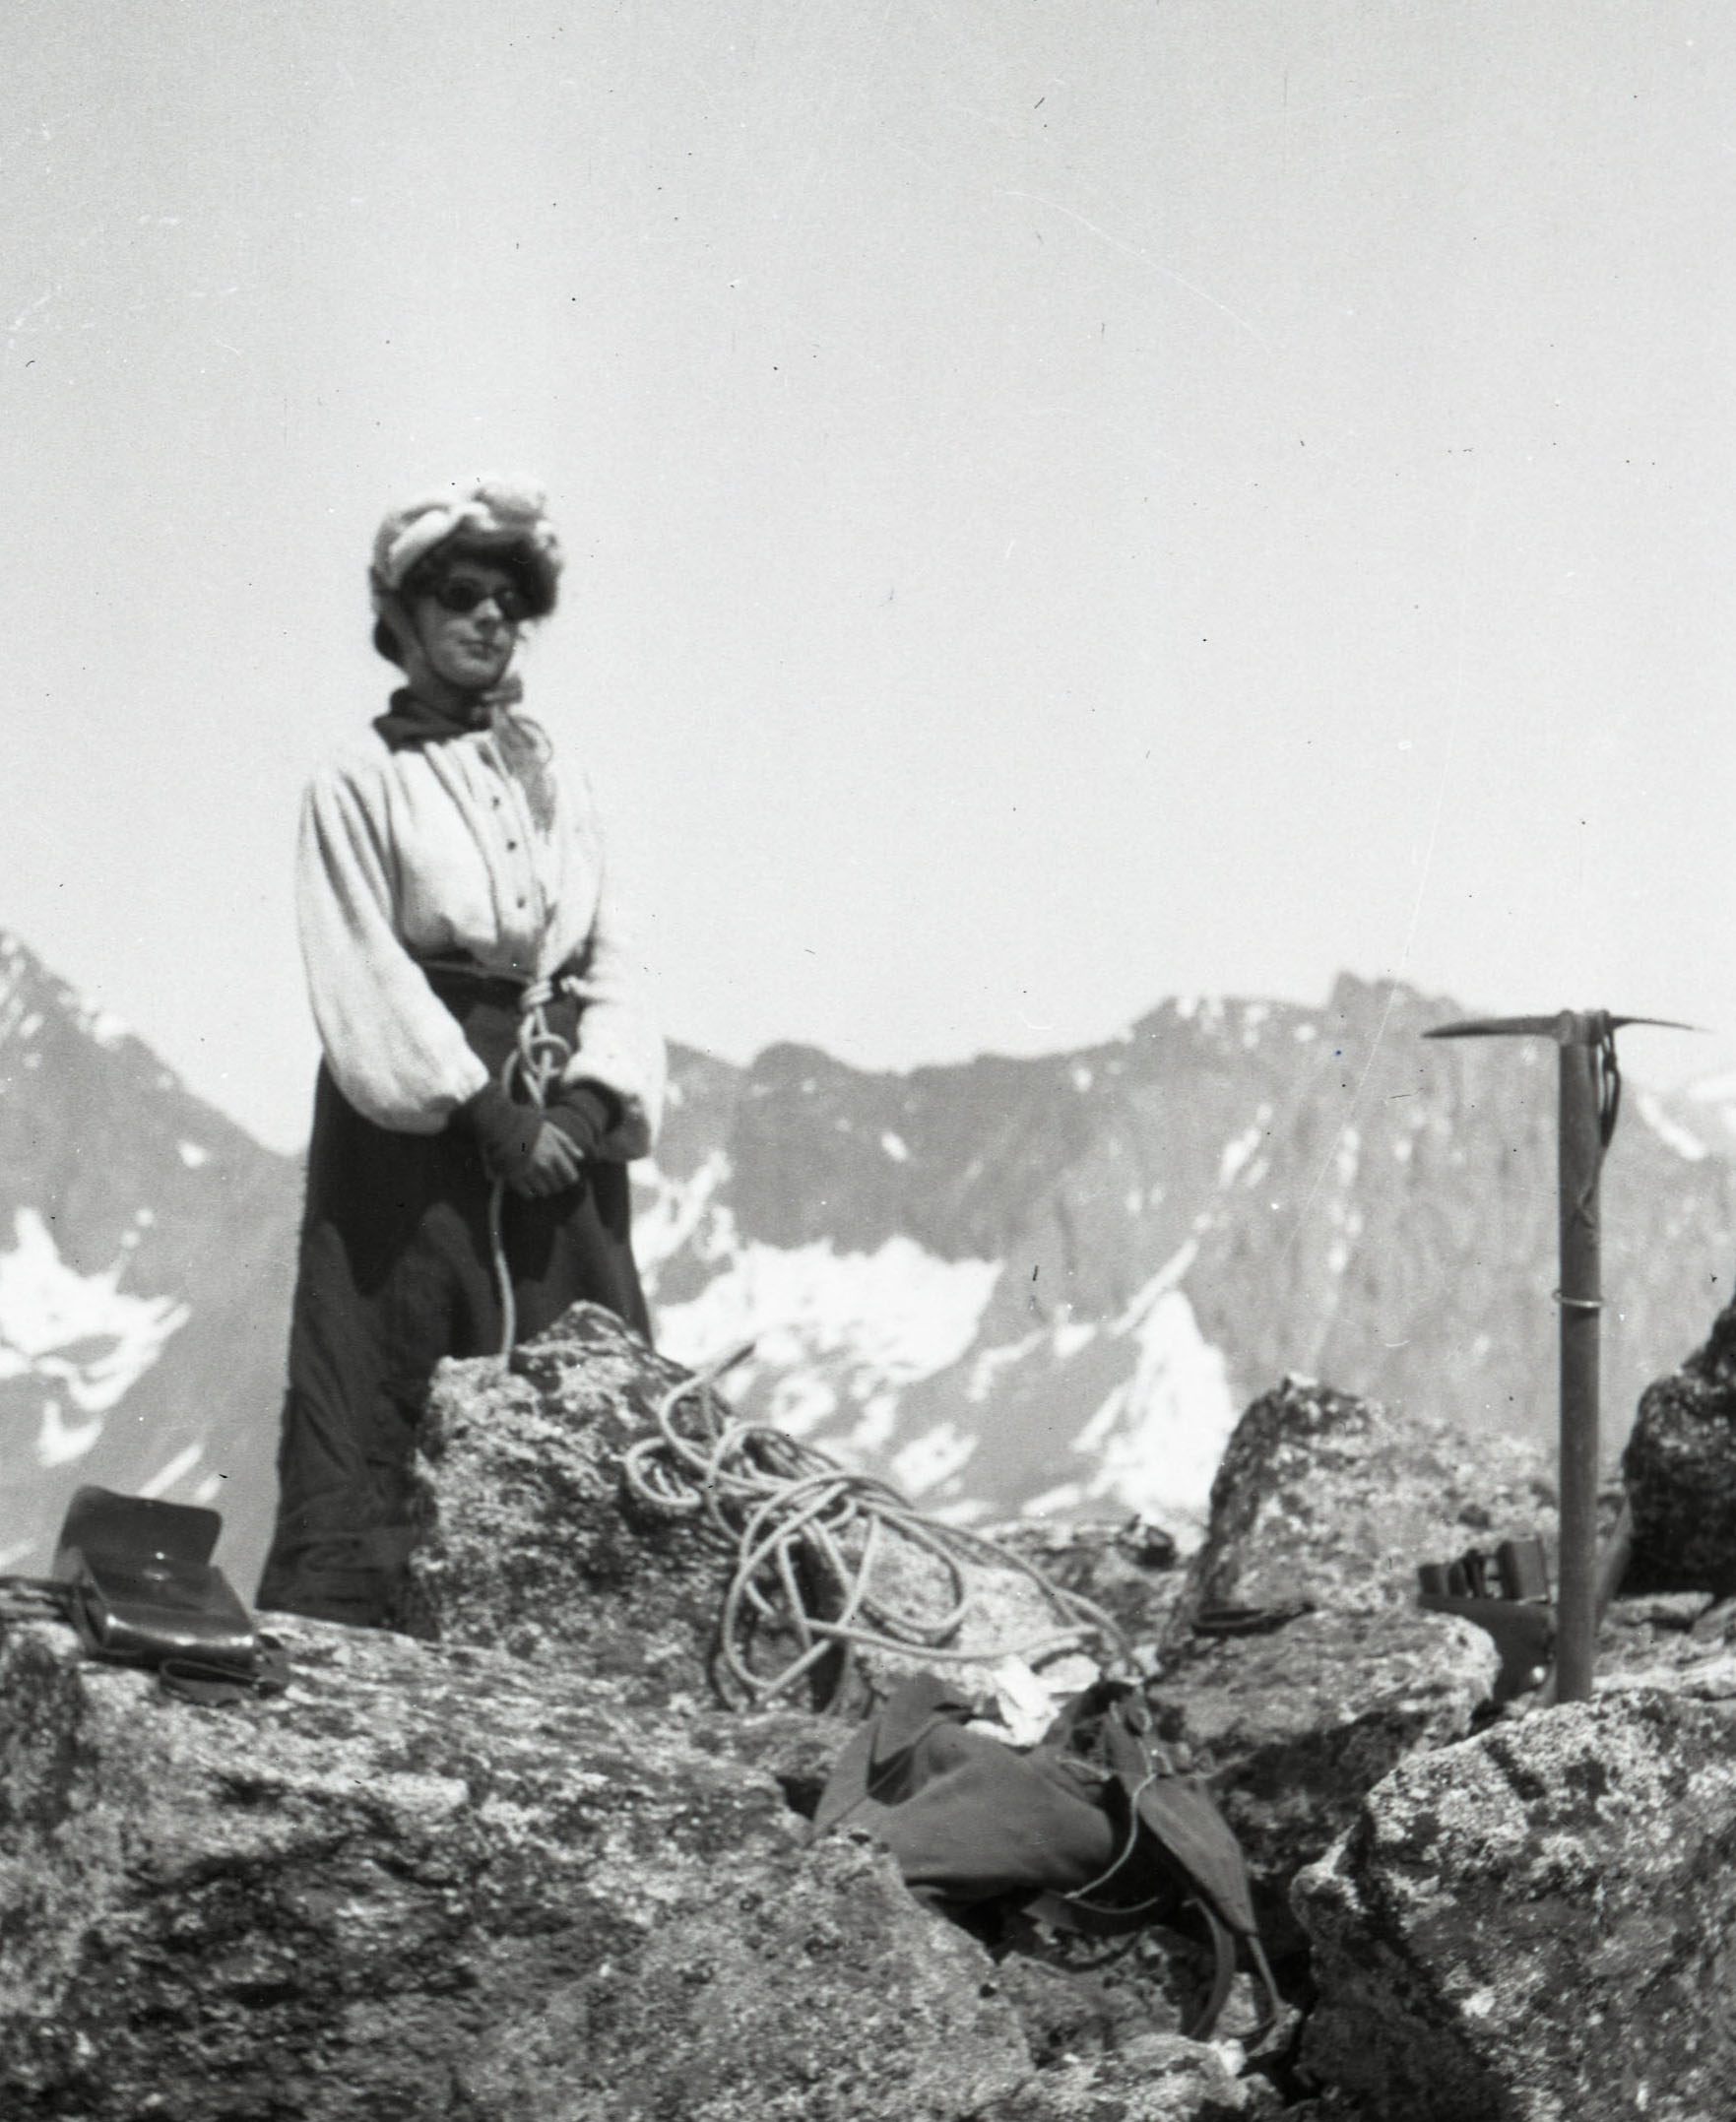 Another summit in the Alps climbed in a dress circa 1911